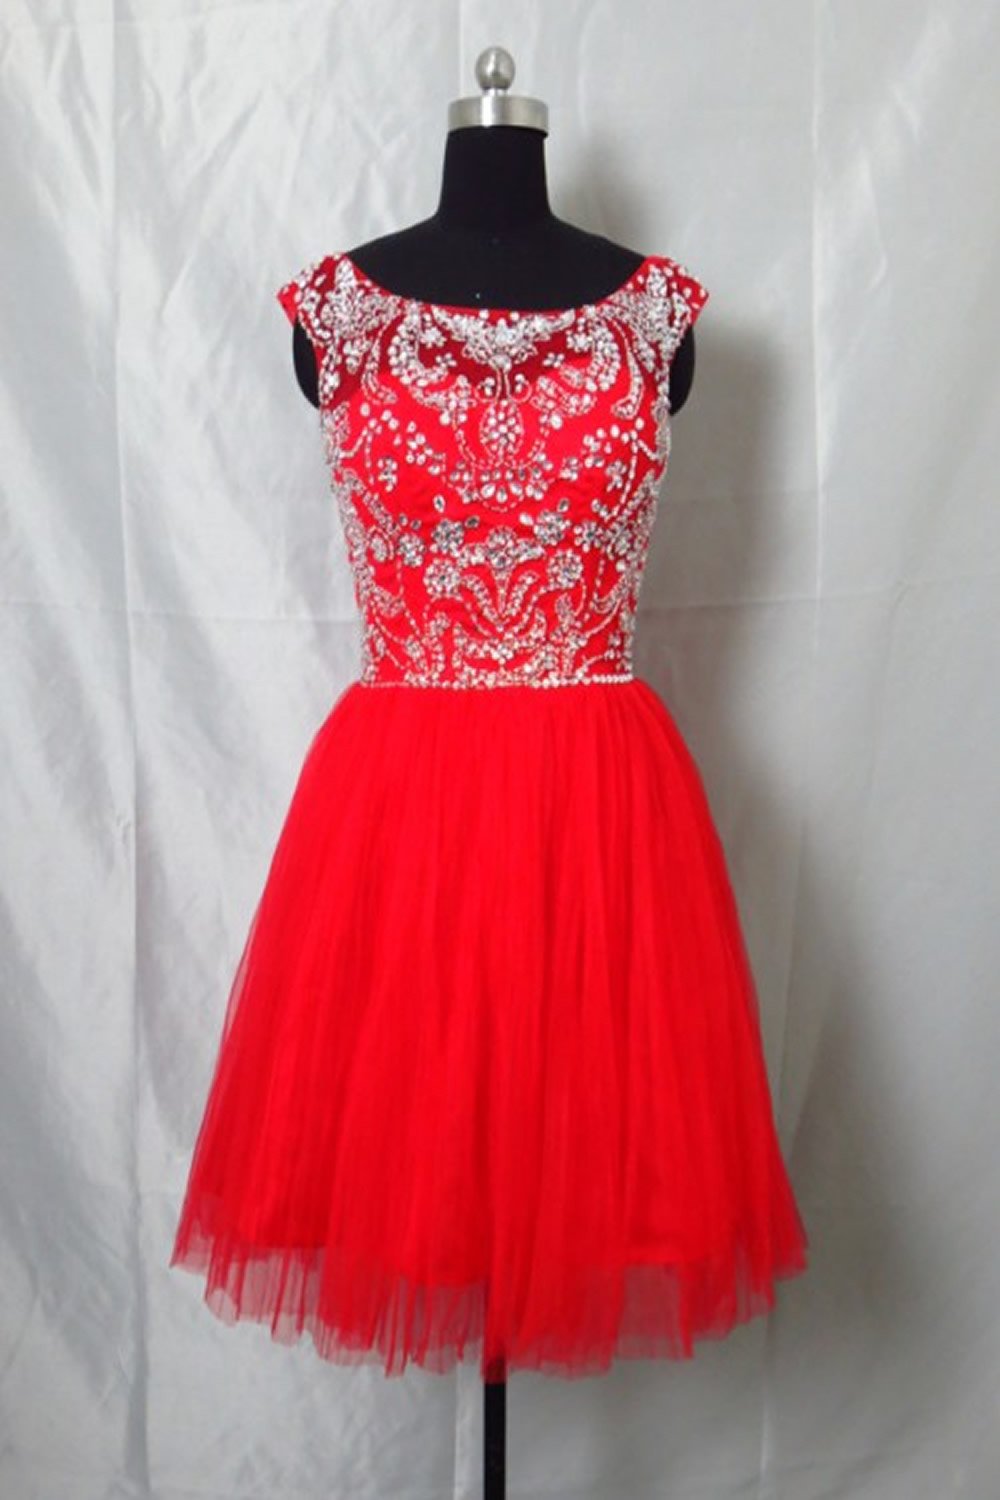 Newest Red Tulle Short Prom Dress Homecoming Dress E60